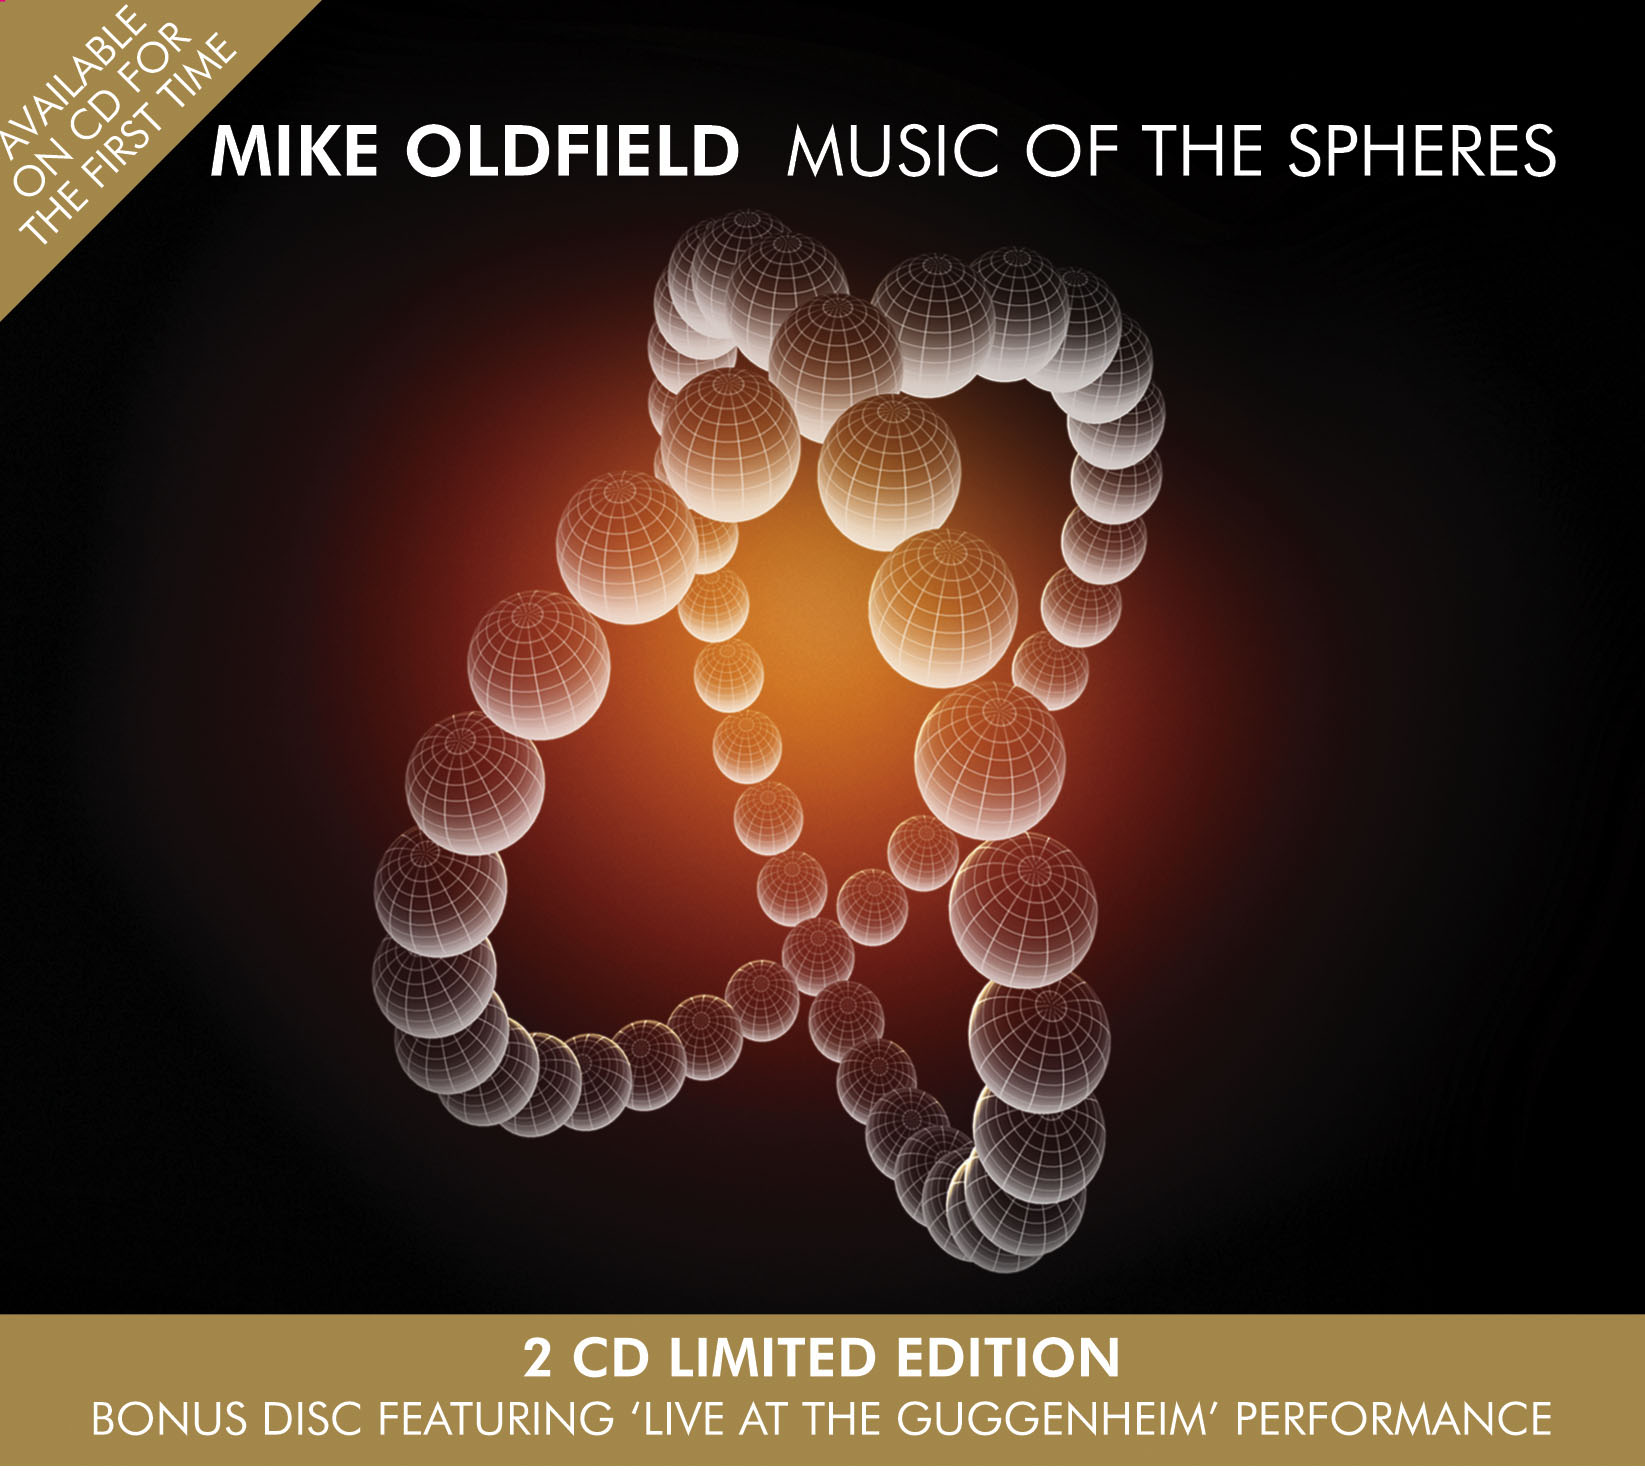 Mike Oldfield - Tubular.net - Archives